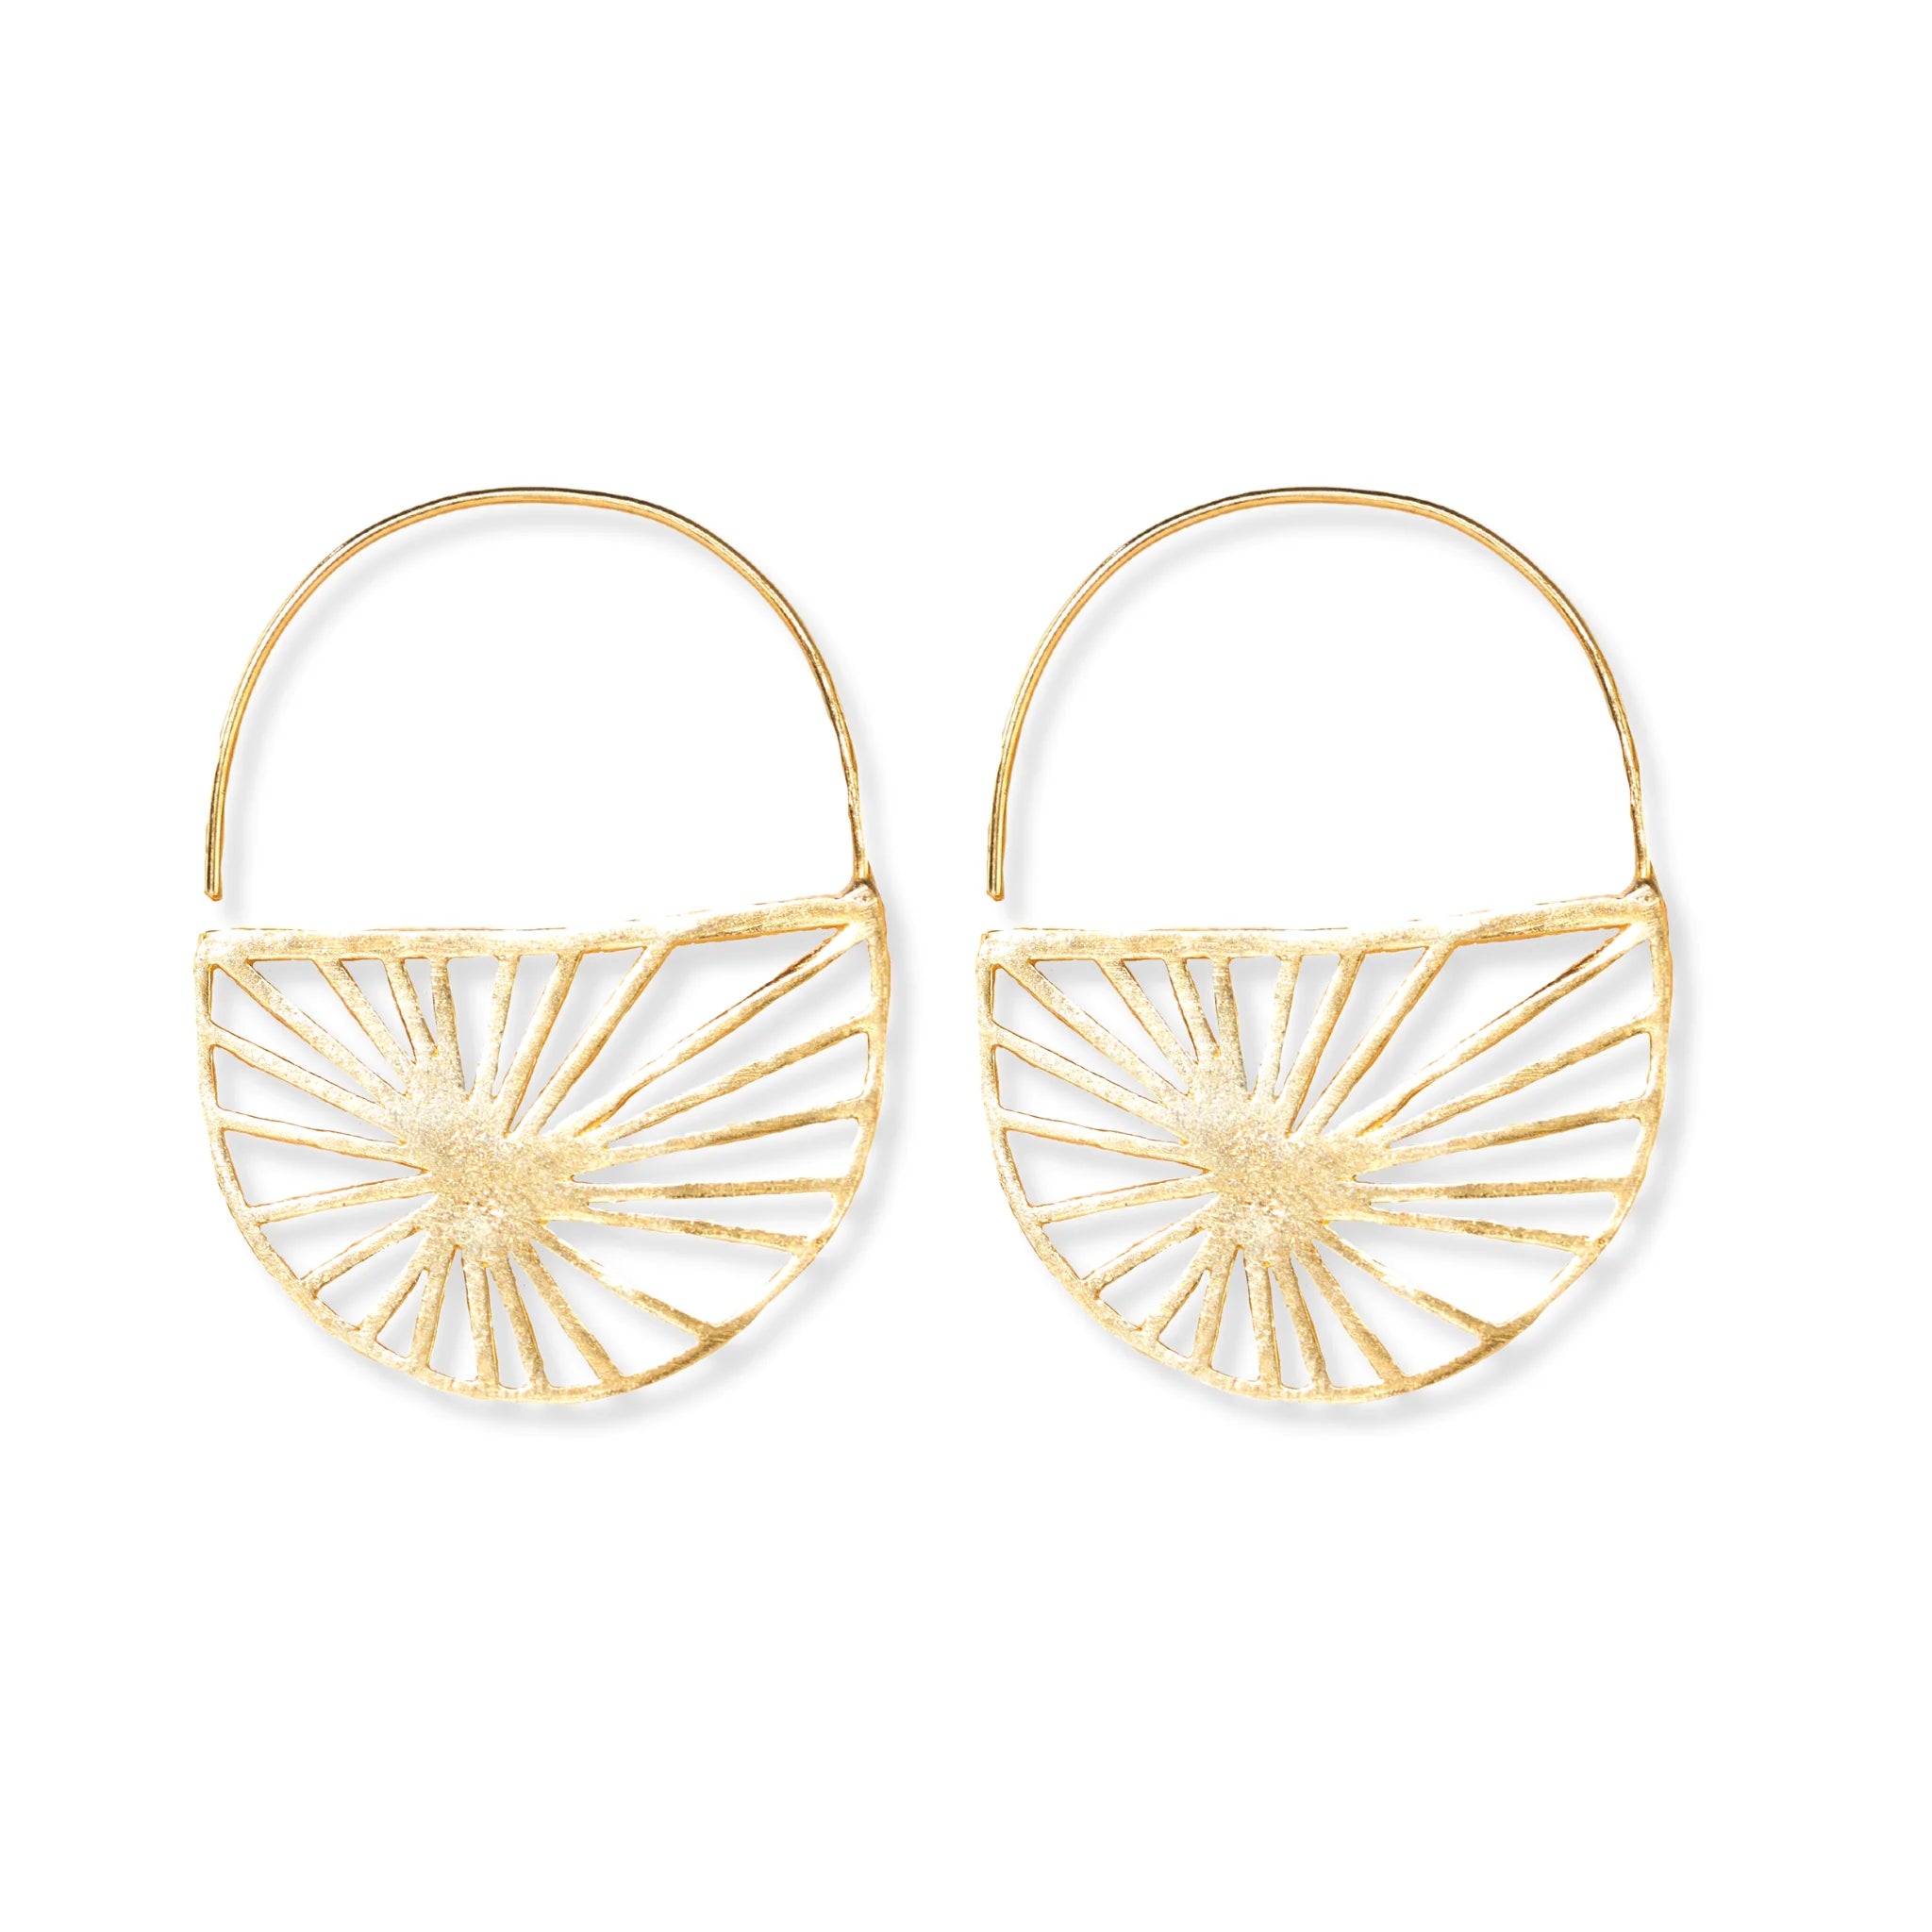 INK AND ALLOY SUNBURST HOOPS